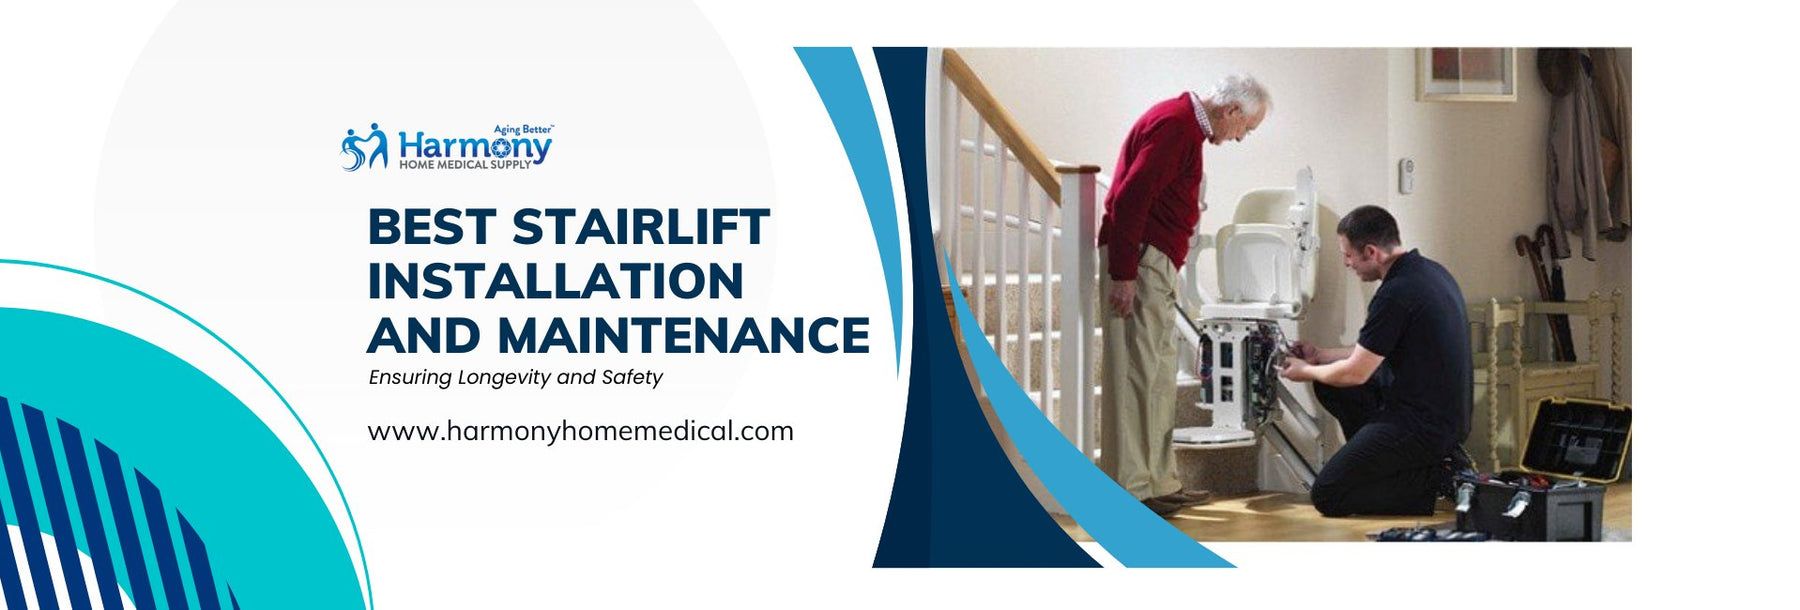 Best Stairlift Installation and Maintenance - Harmony Home Medical Supply